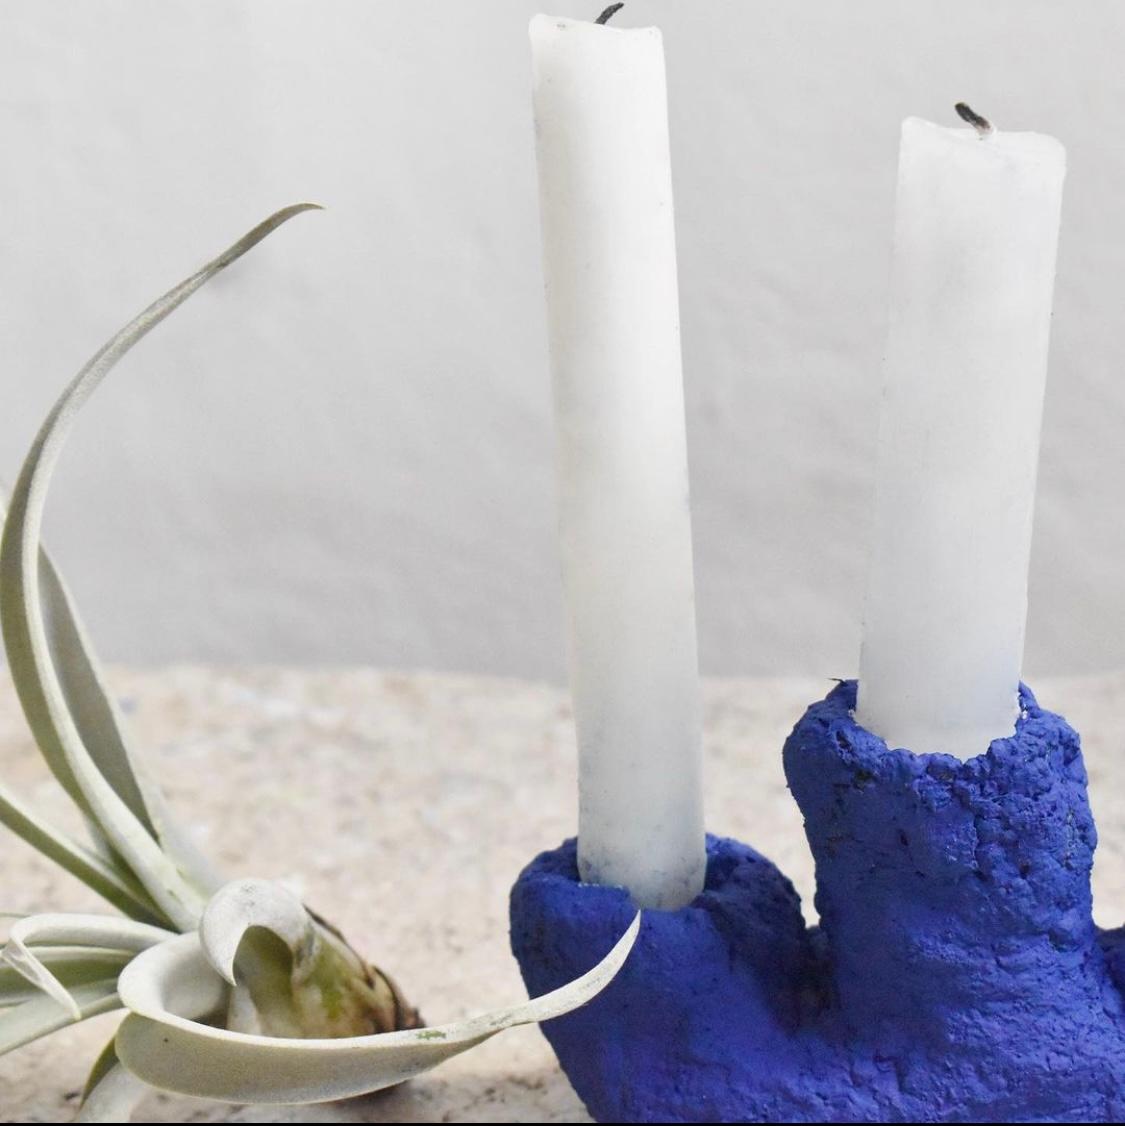 The Alcyonacea candle holder is perfect for adding a touch of elegance and sustainability to your home. Handcrafted with recycled paper, this unique piece evokes the beauty of marine corals with its organic shapes and intricate details, making it a